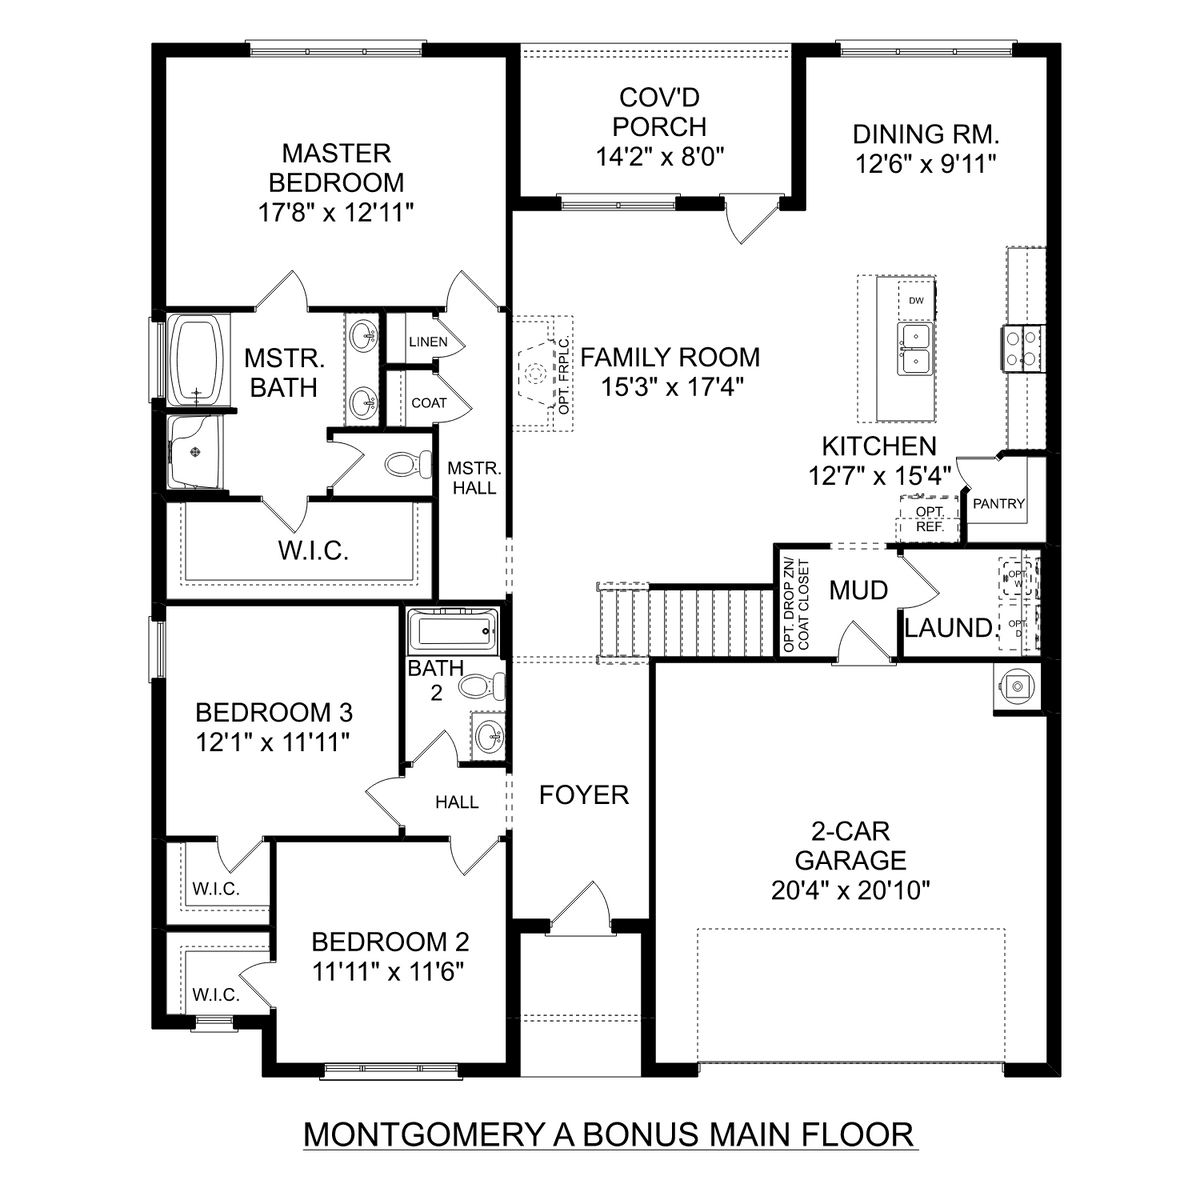 1 - The Montgomery with Bonus buildable floor plan layout in Davidson Homes' Kendall Downs community.